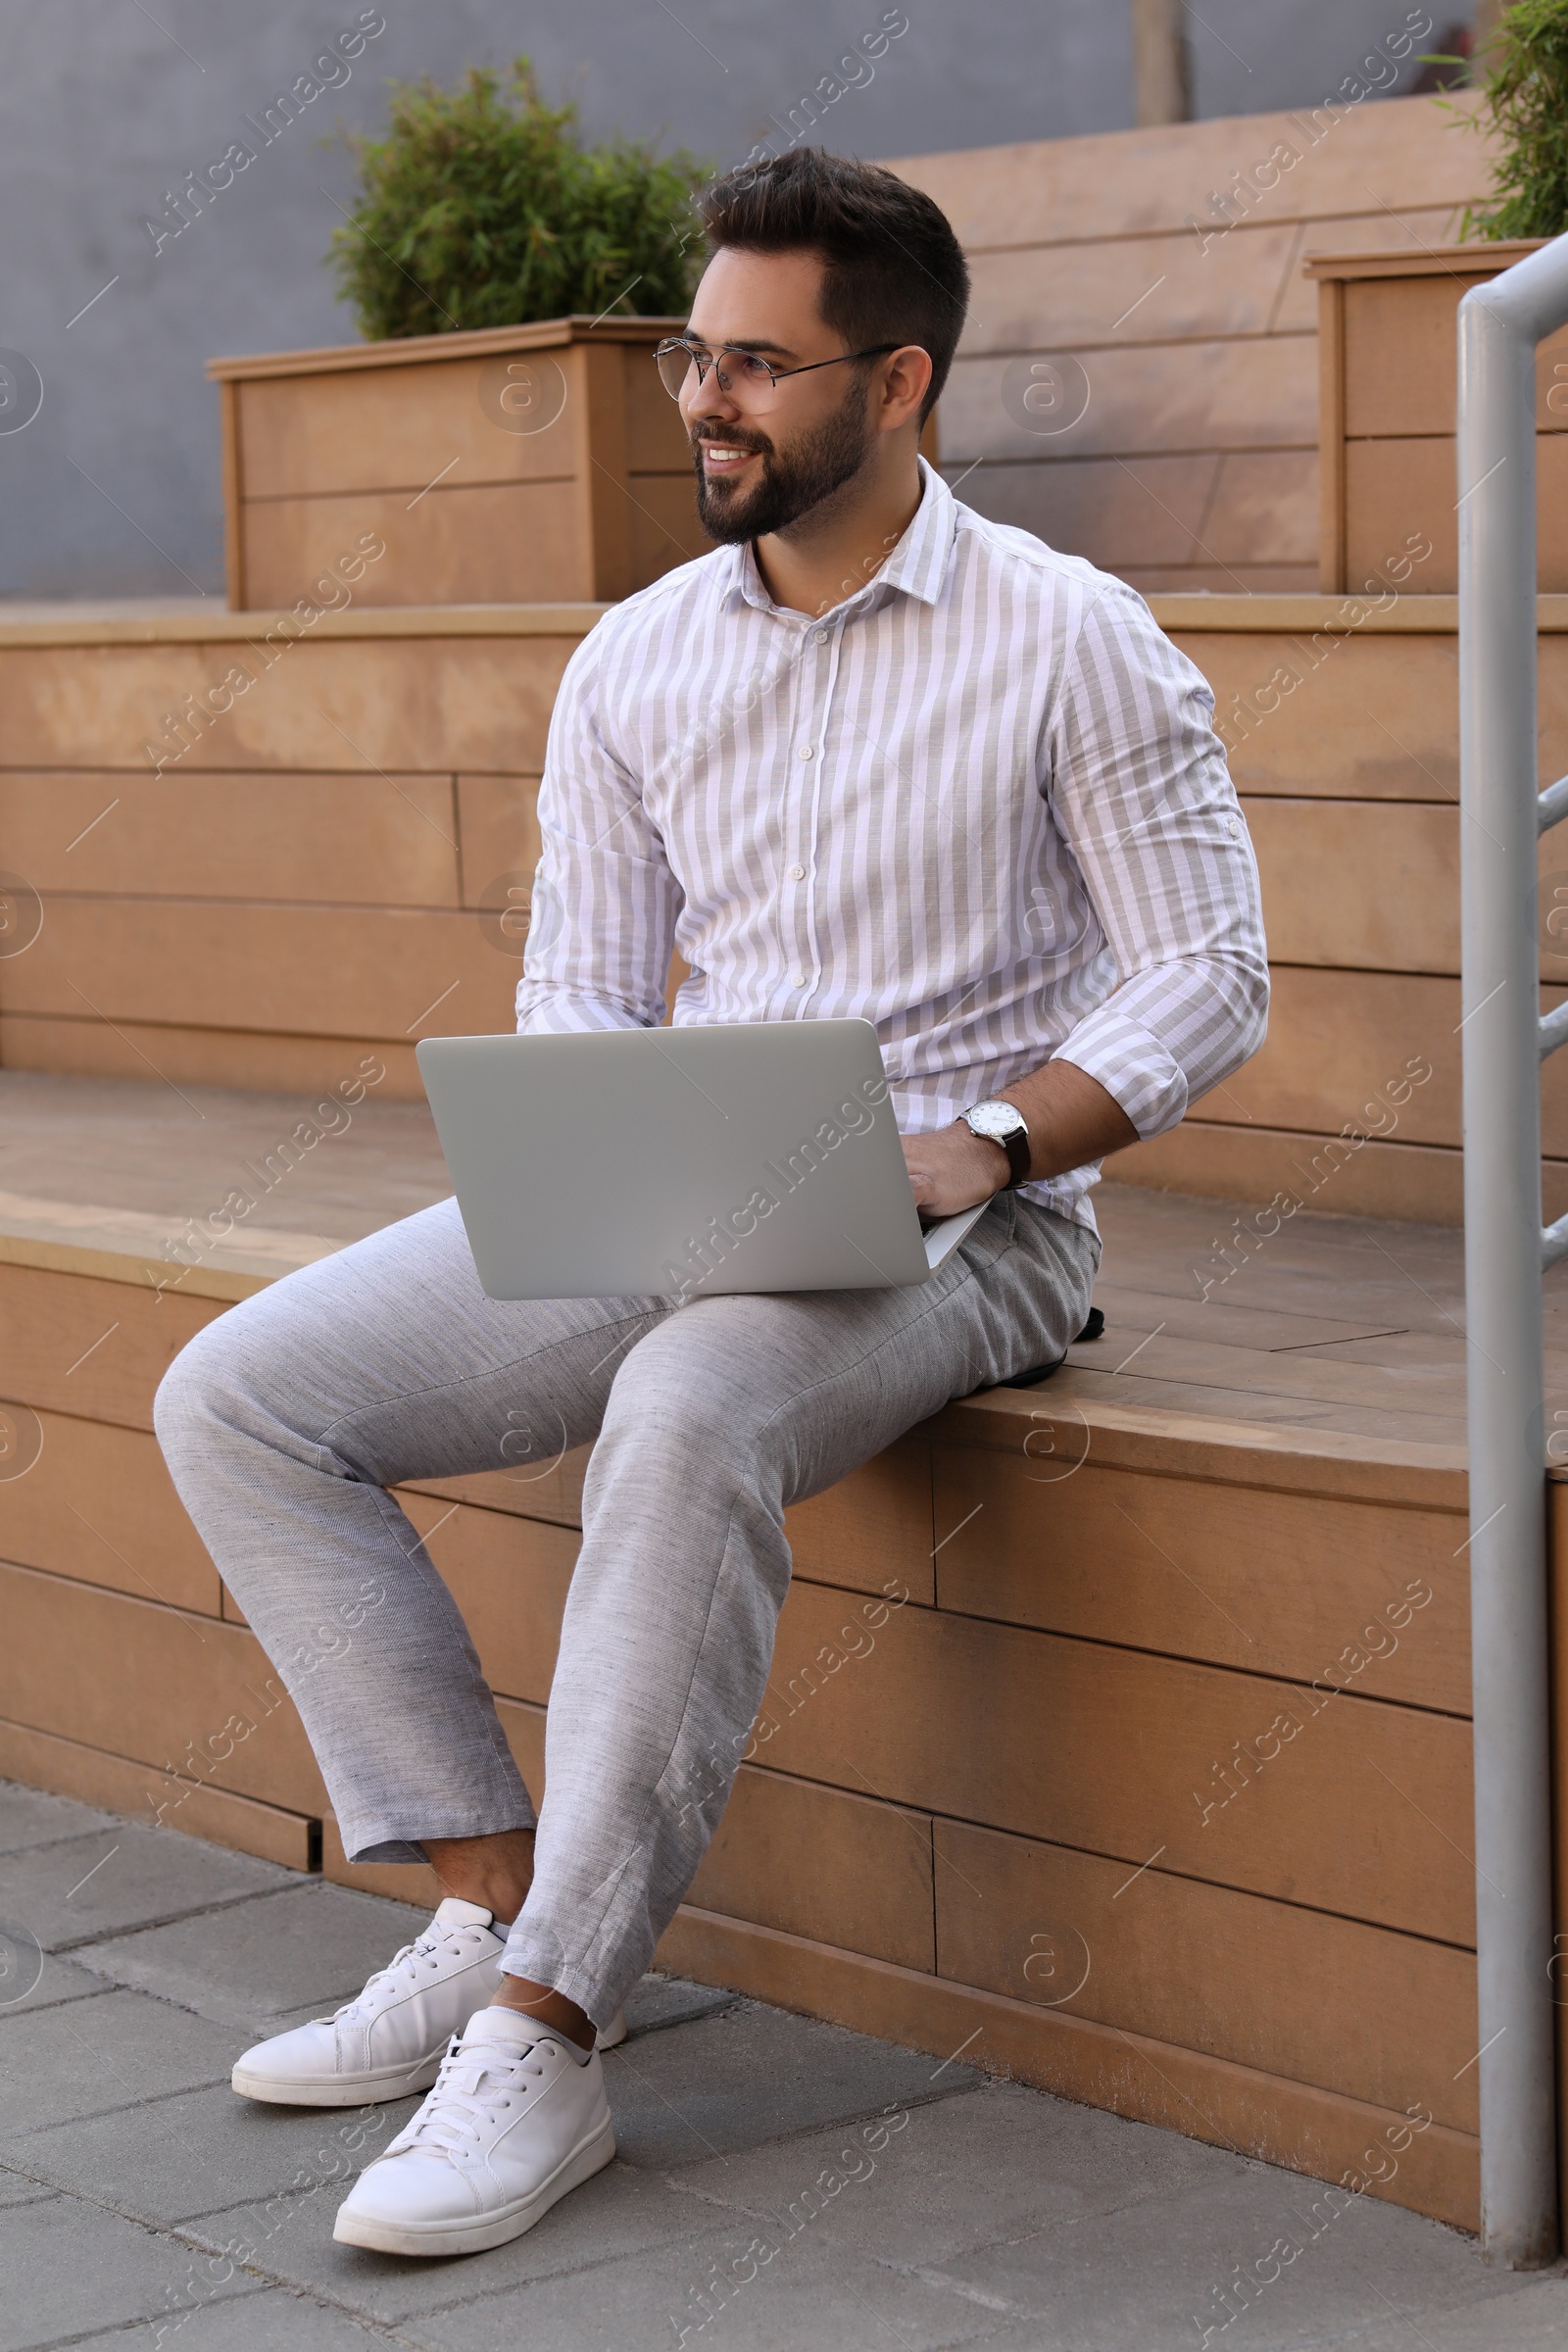 Photo of Handsome young man using laptop on bench outdoors